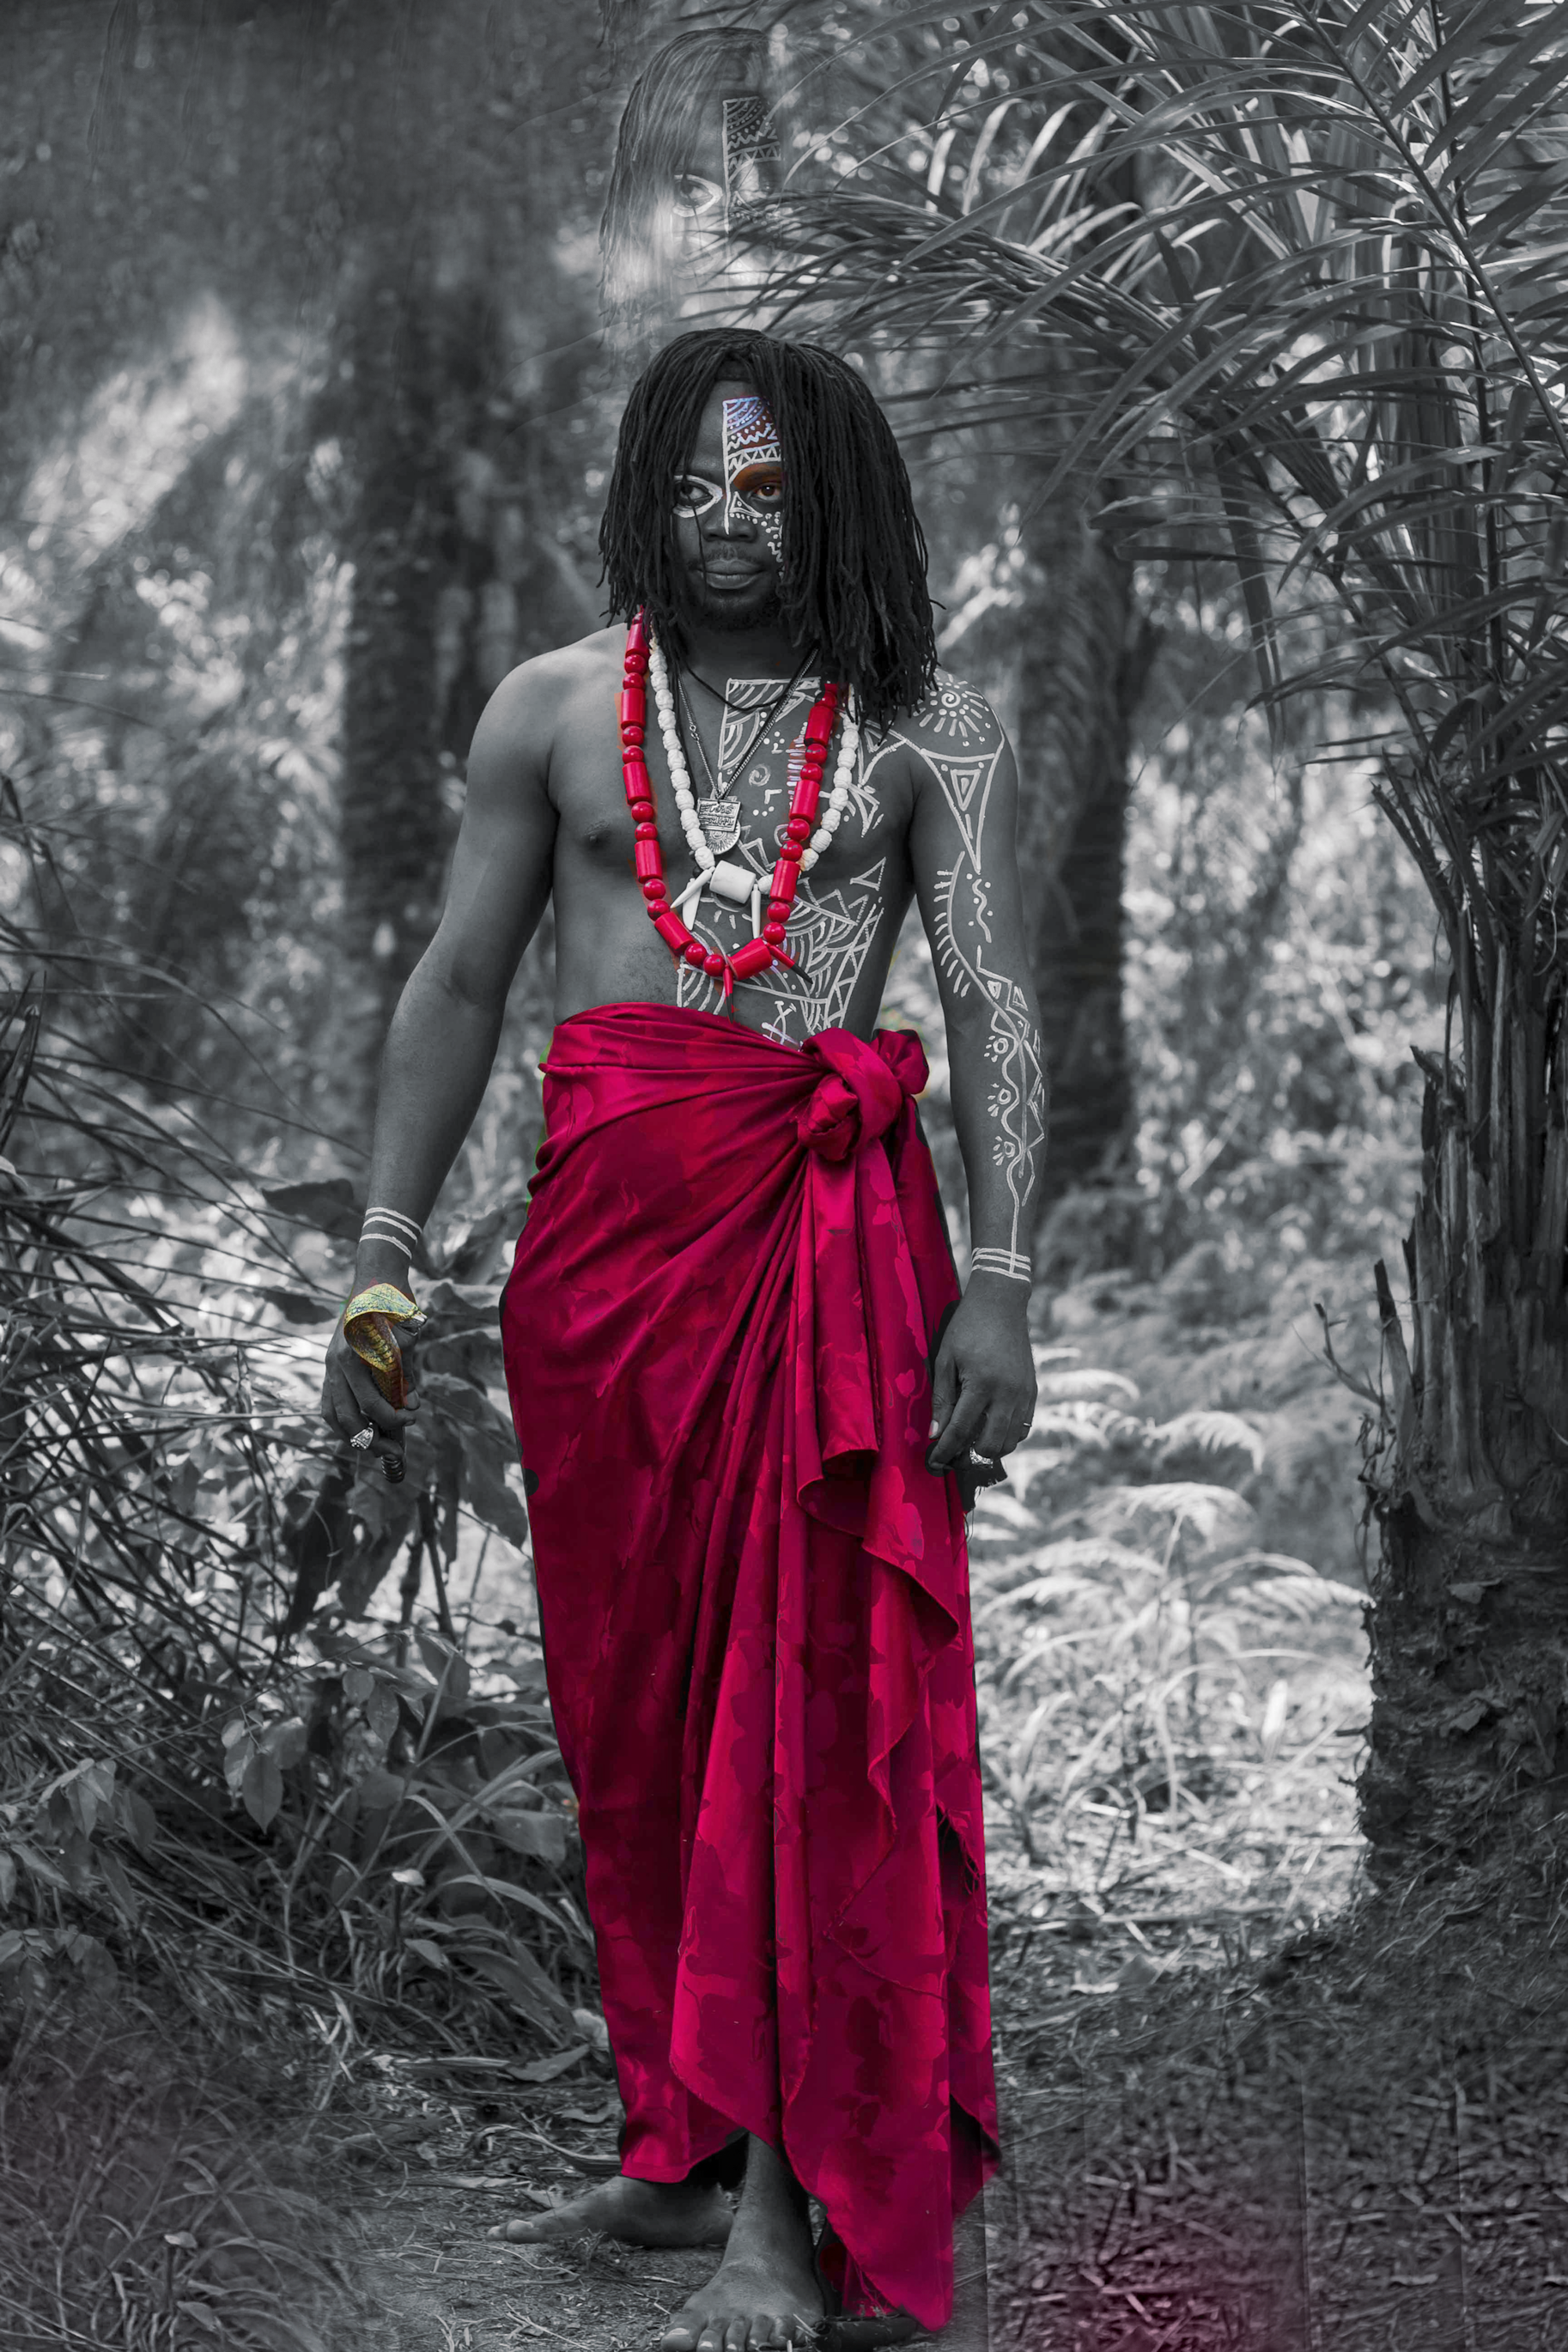 Oku strikes a pose in a traditional African priest attire